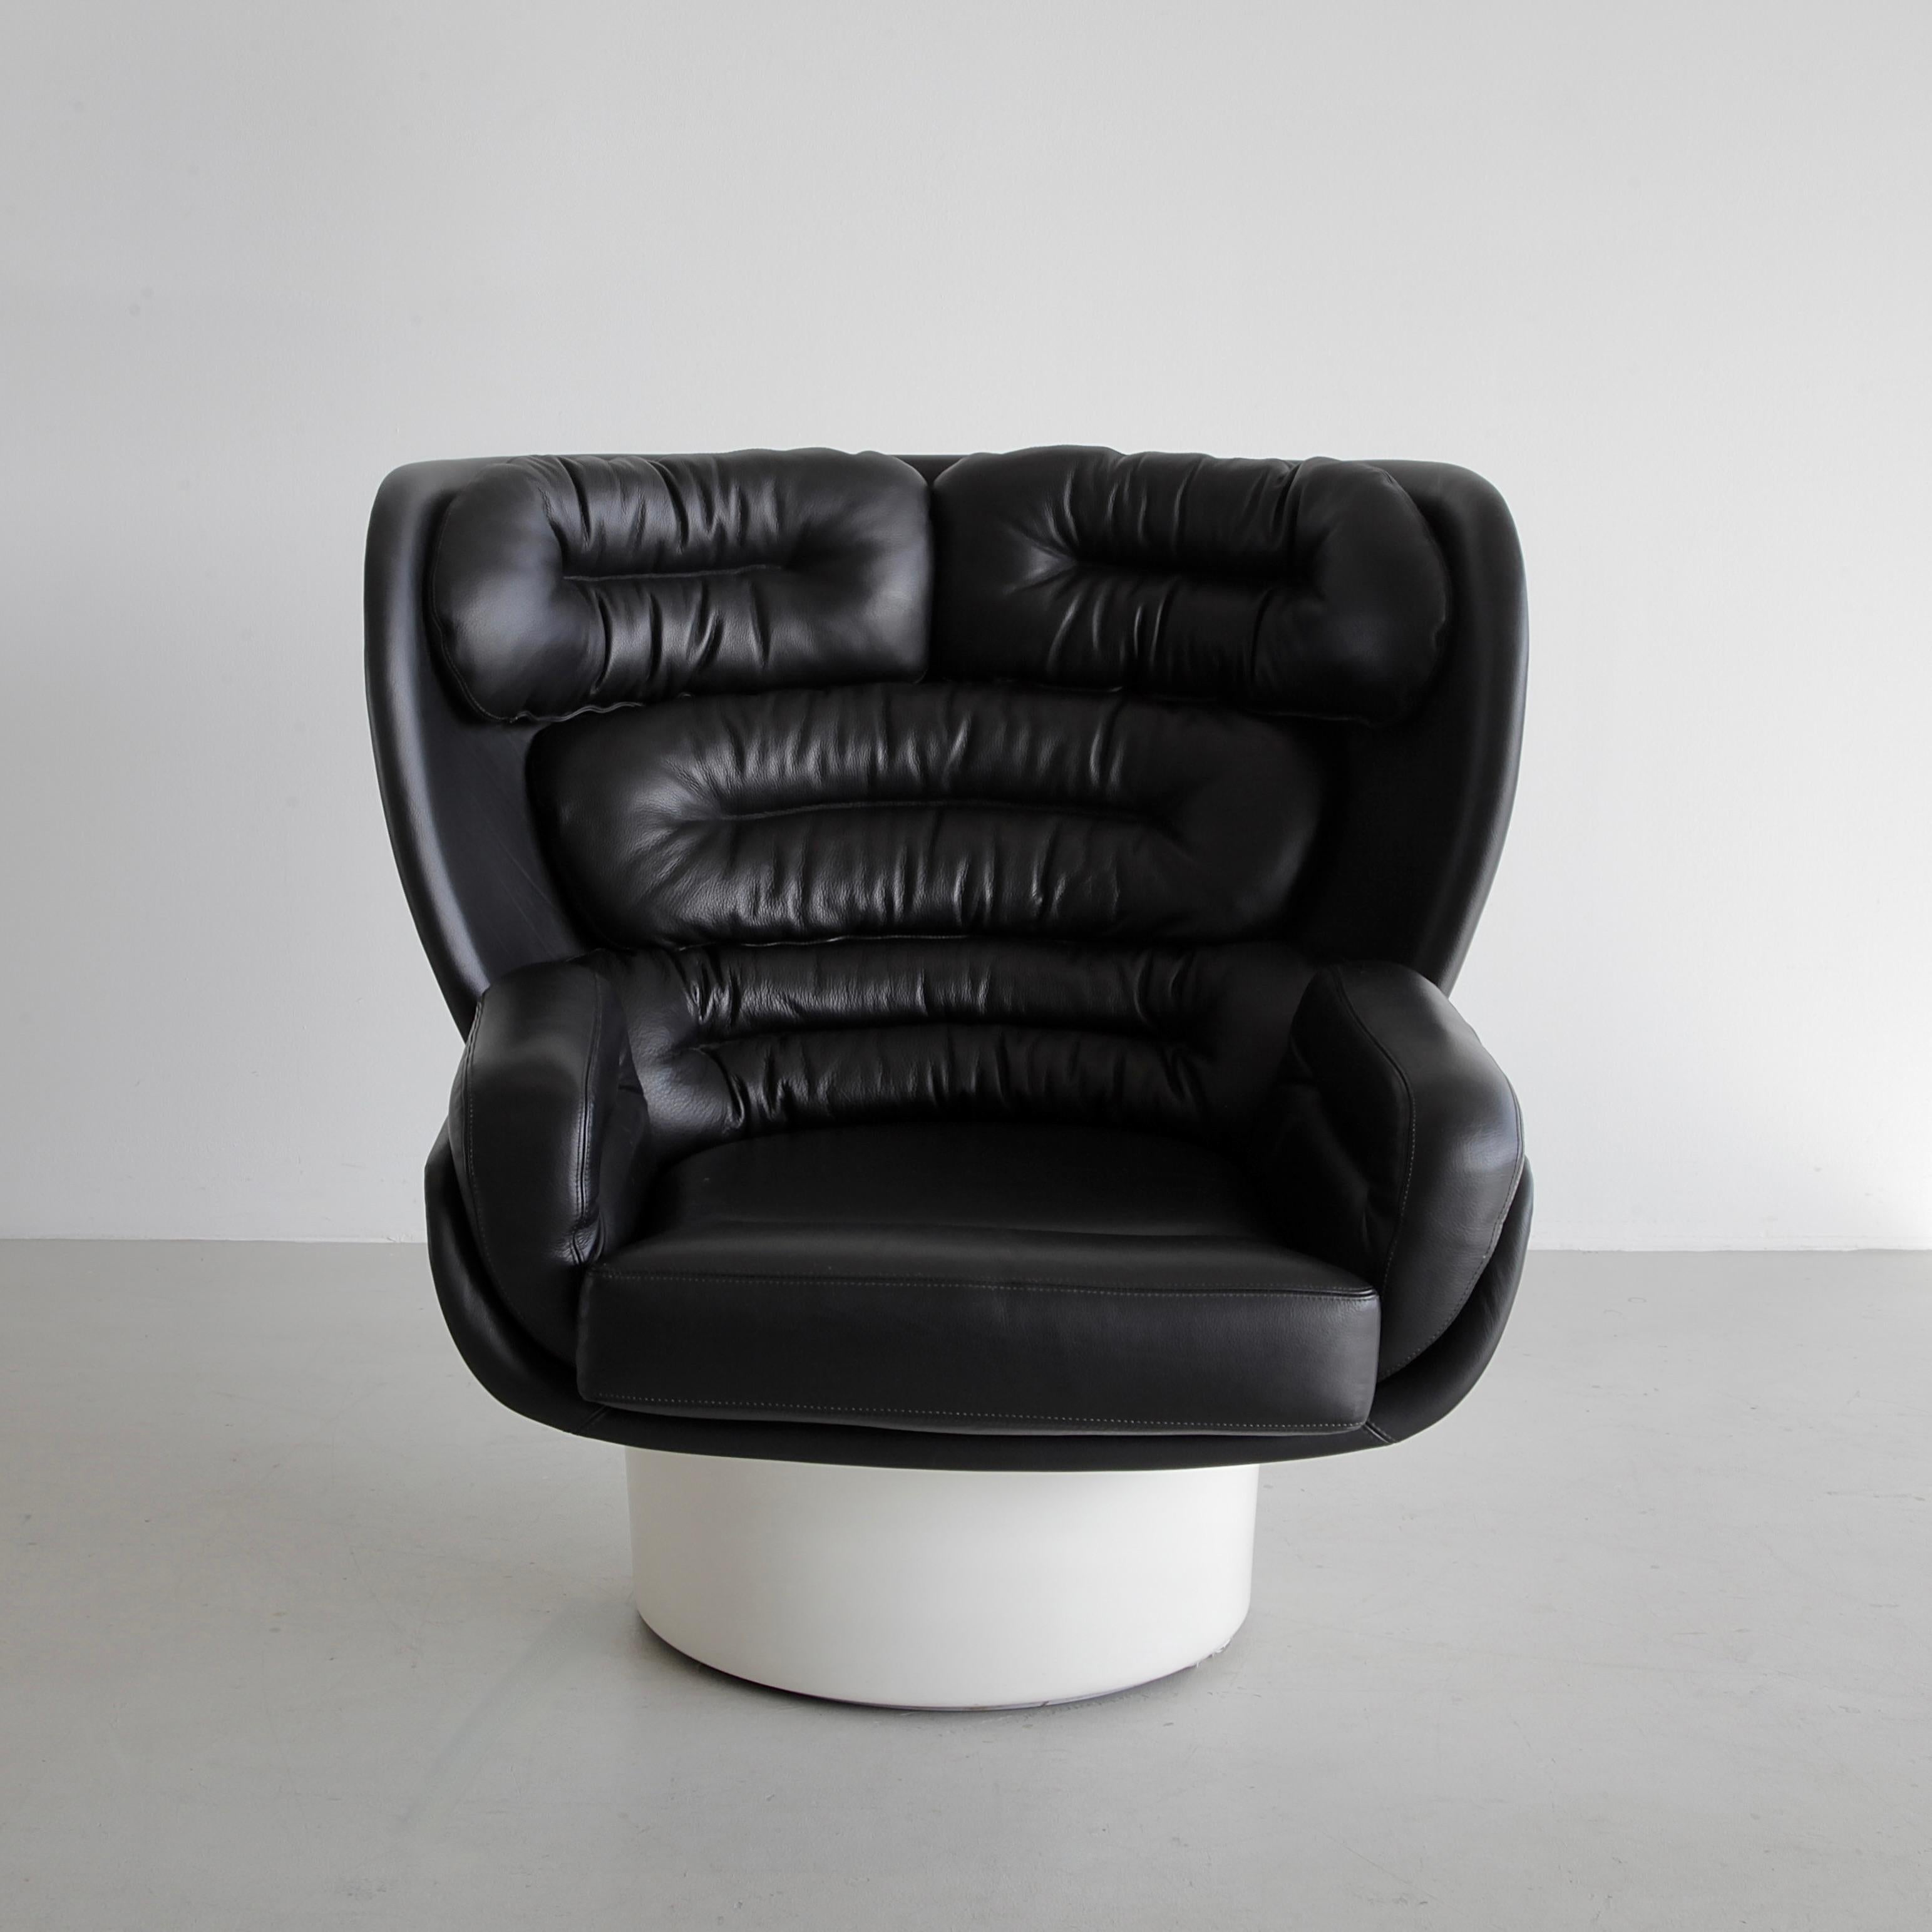 ELDA chair designed by Joe Colombo. Italy, Comfort, 1963.

Vintage rotating white fibreglass shell with moulded cushions in subtle original black leather. Sitting on a 360-degree revolving base. Excellent vintage condition and very comfortable